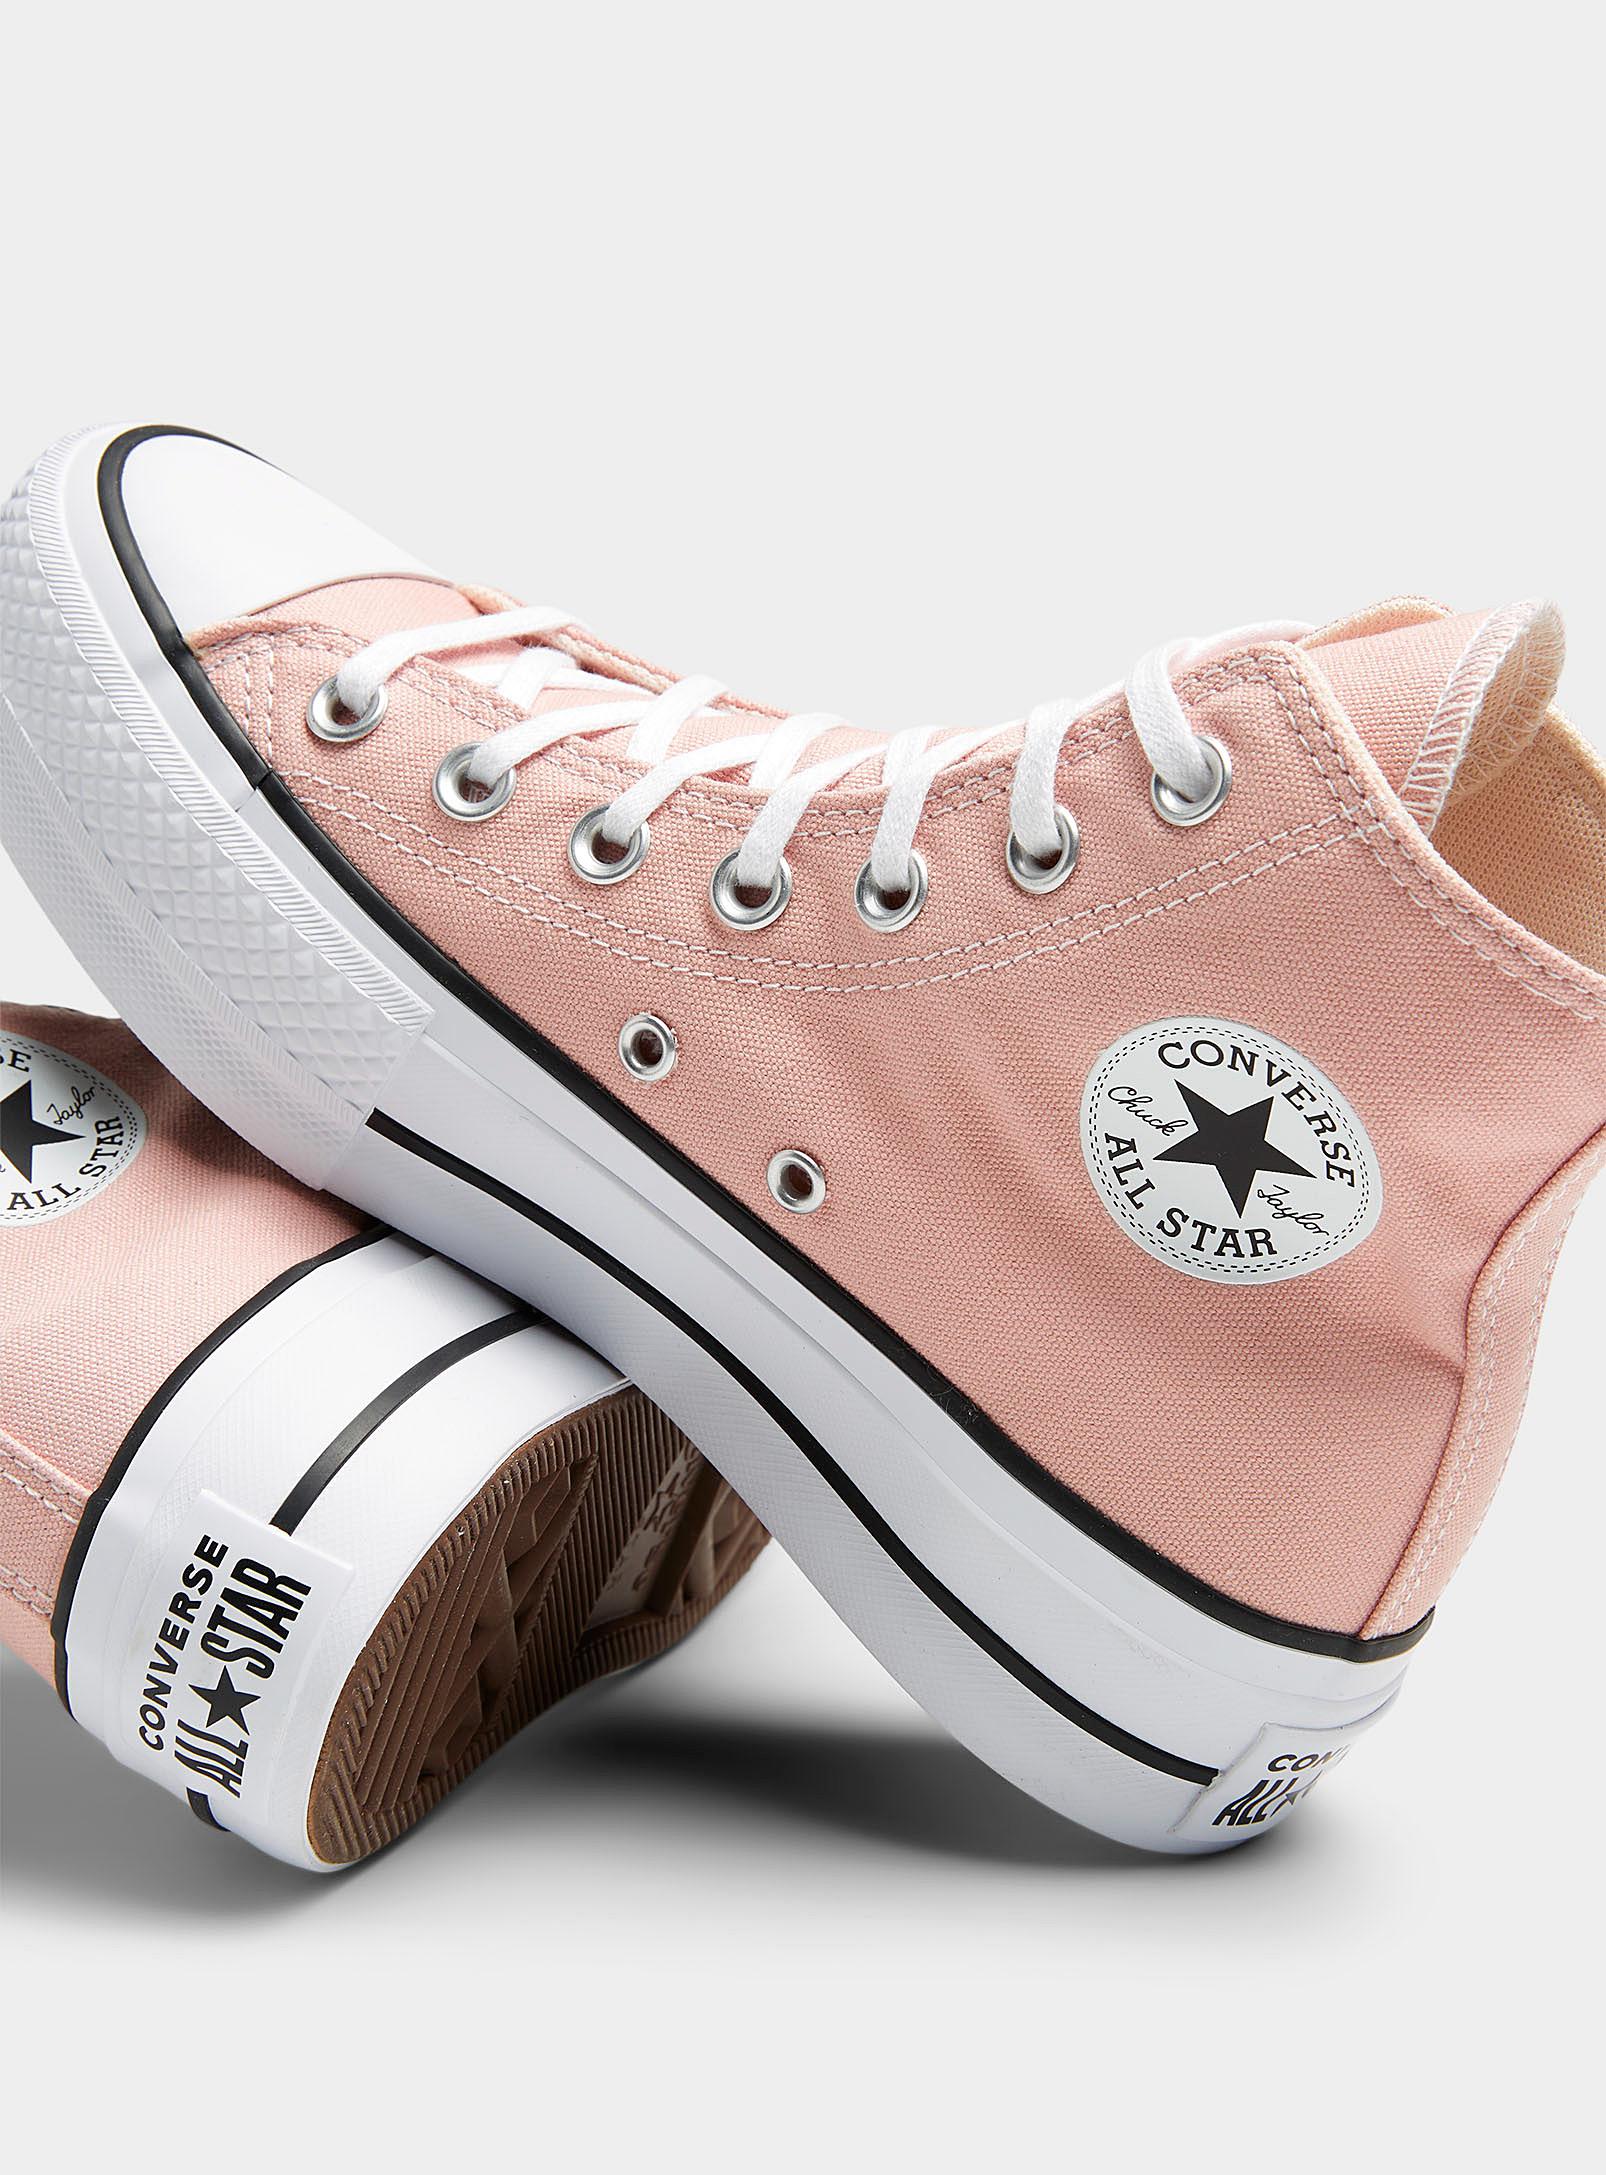 Converse Chuck Taylor All Star High Top Pink Clay Platform Sneakers Women |  Lyst